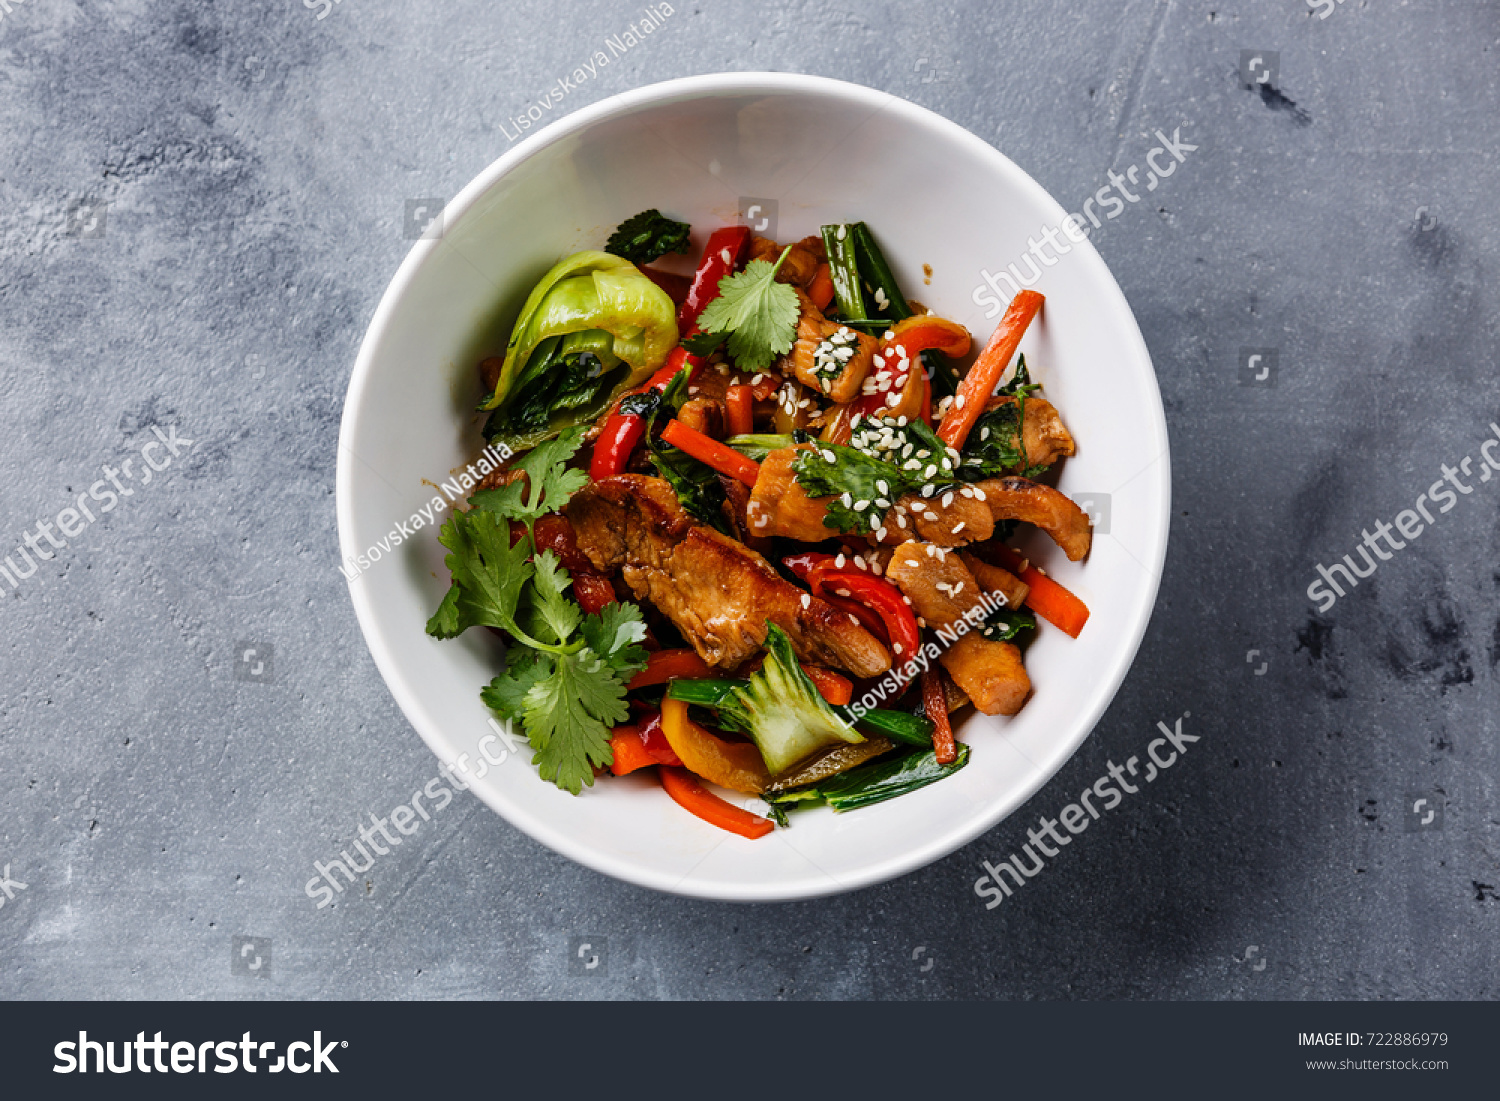 Chicken meat with vegetable in bowl stir fry on wok on concrete background #722886979